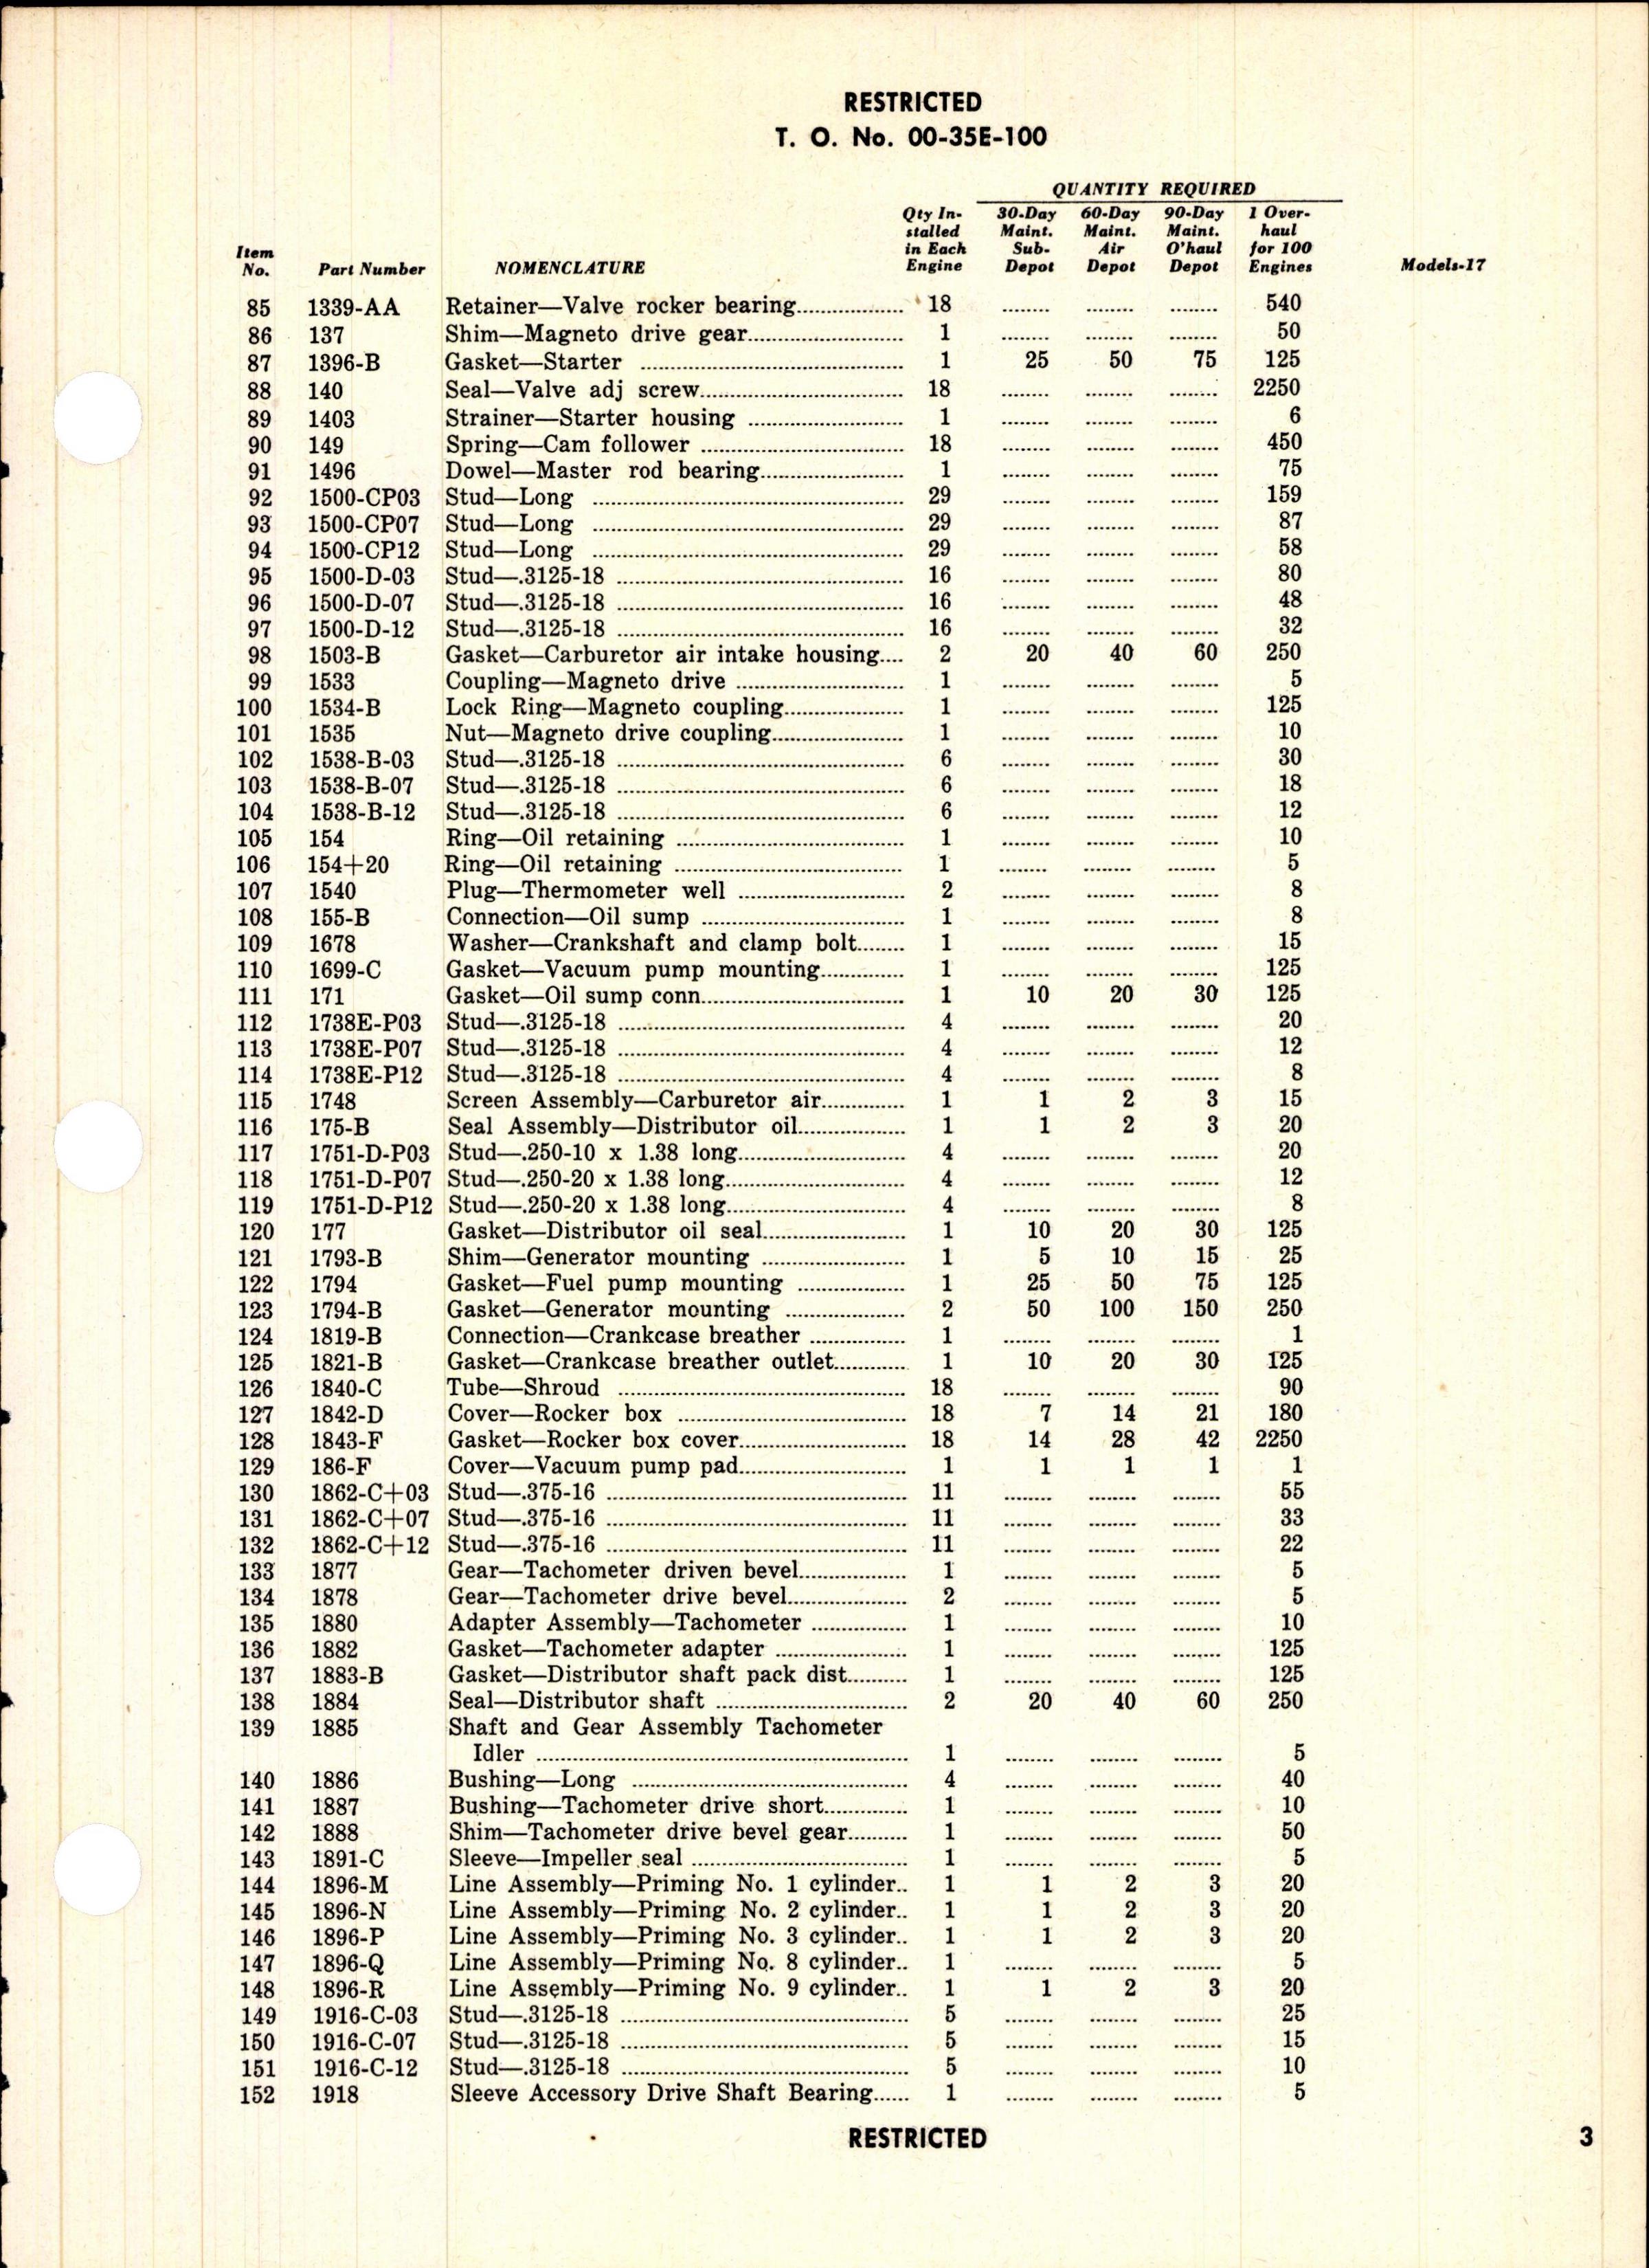 Sample page 5 from AirCorps Library document: Table of Credit - Maintenance & Overhaul Parts - R-680-17 Engine